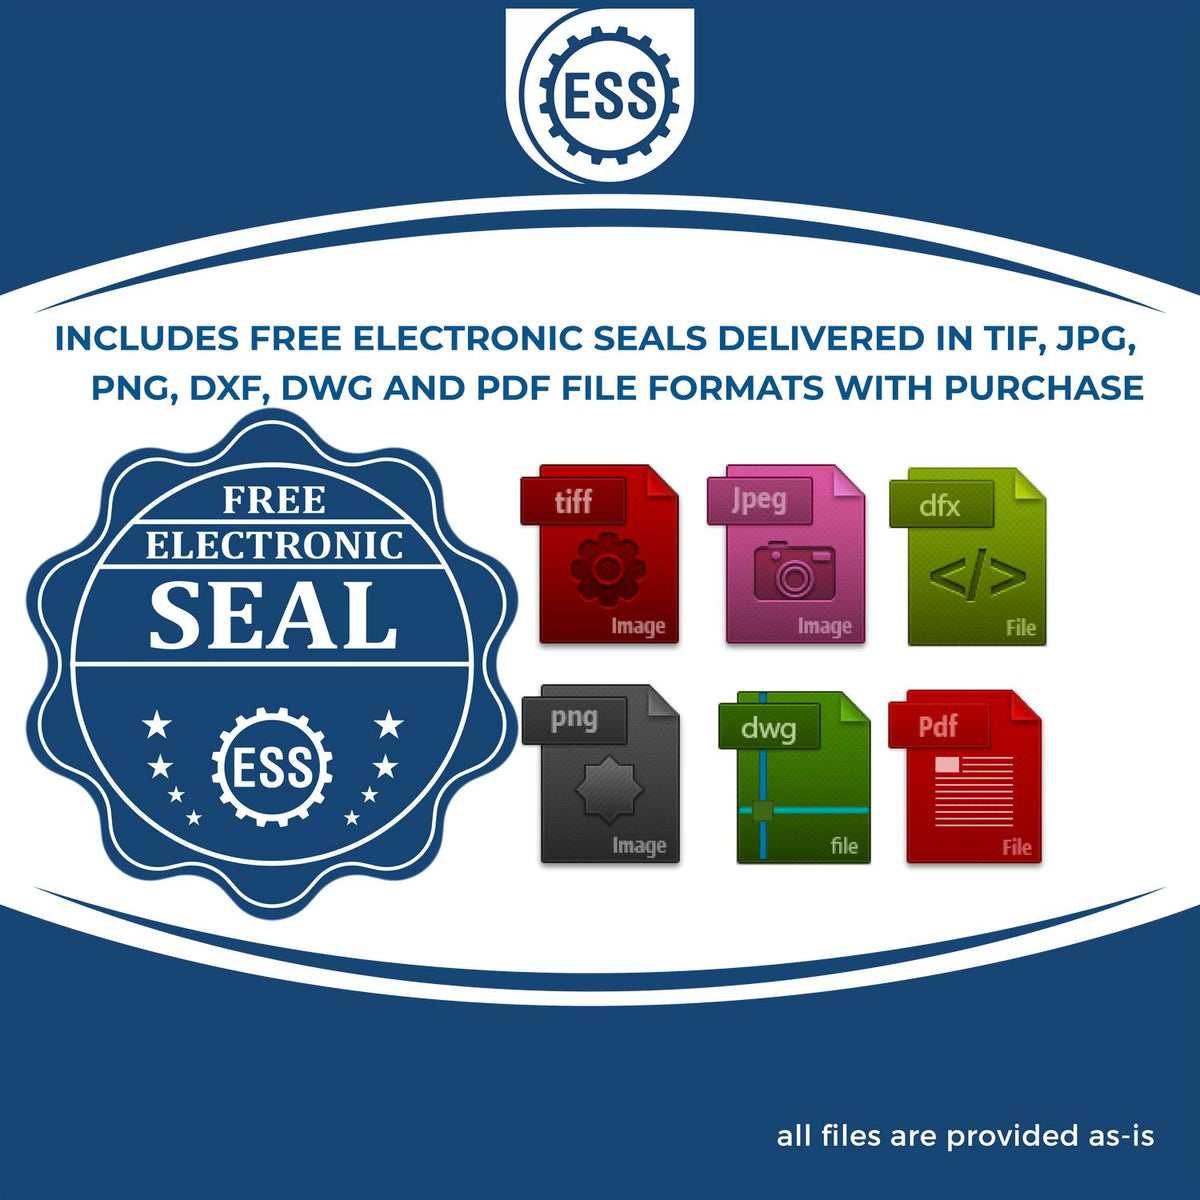 An infographic for the free electronic seal for the Self-Inking New Hampshire Geologist Stamp illustrating the different file type icons such as DXF, DWG, TIF, JPG and PNG.